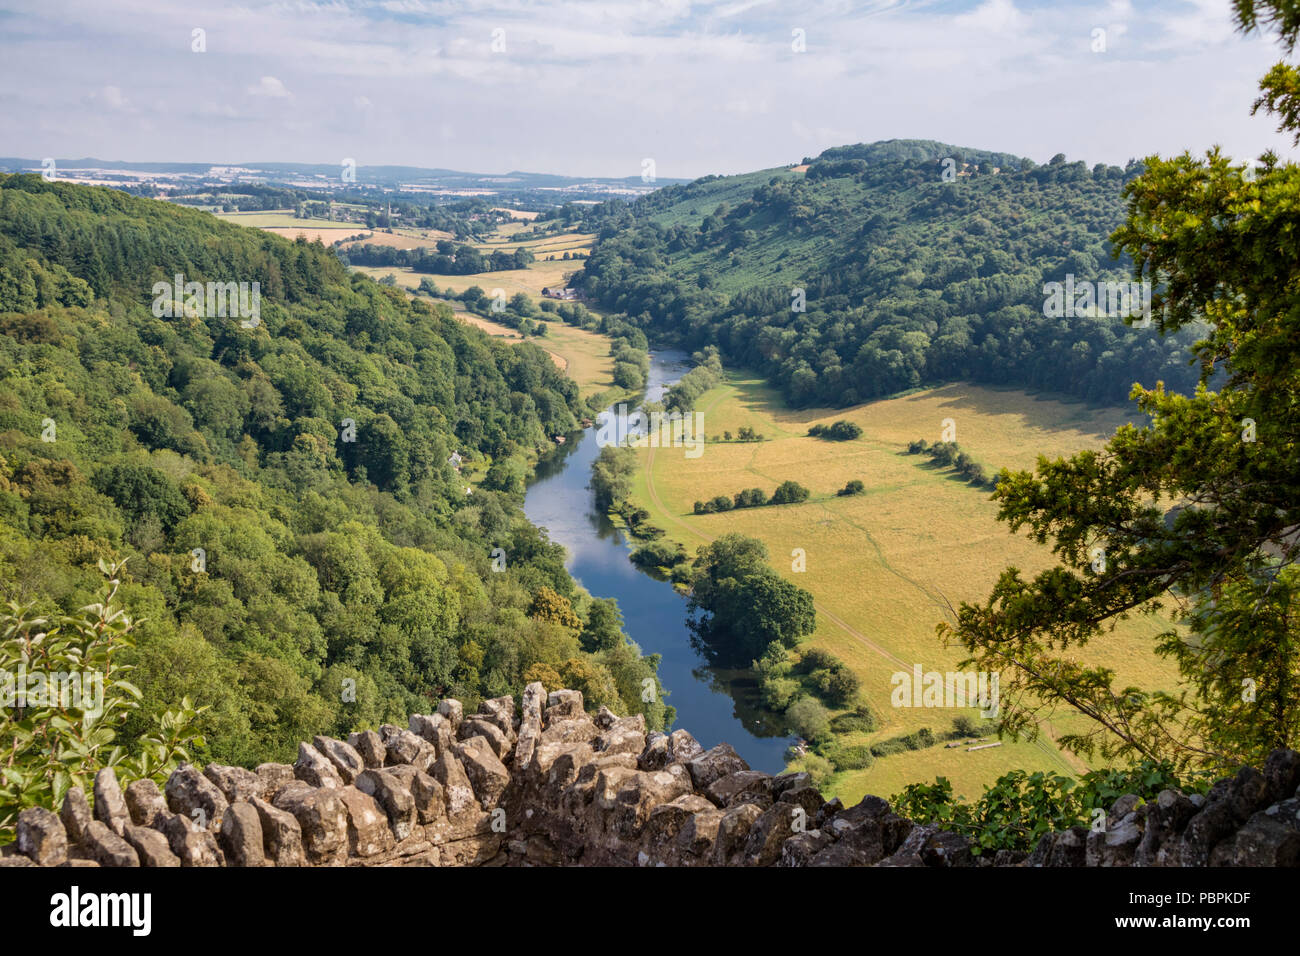 Symonds Yat rock in the Wye valley looking over the River Wye Herefordshire, England, UK Stock Photo